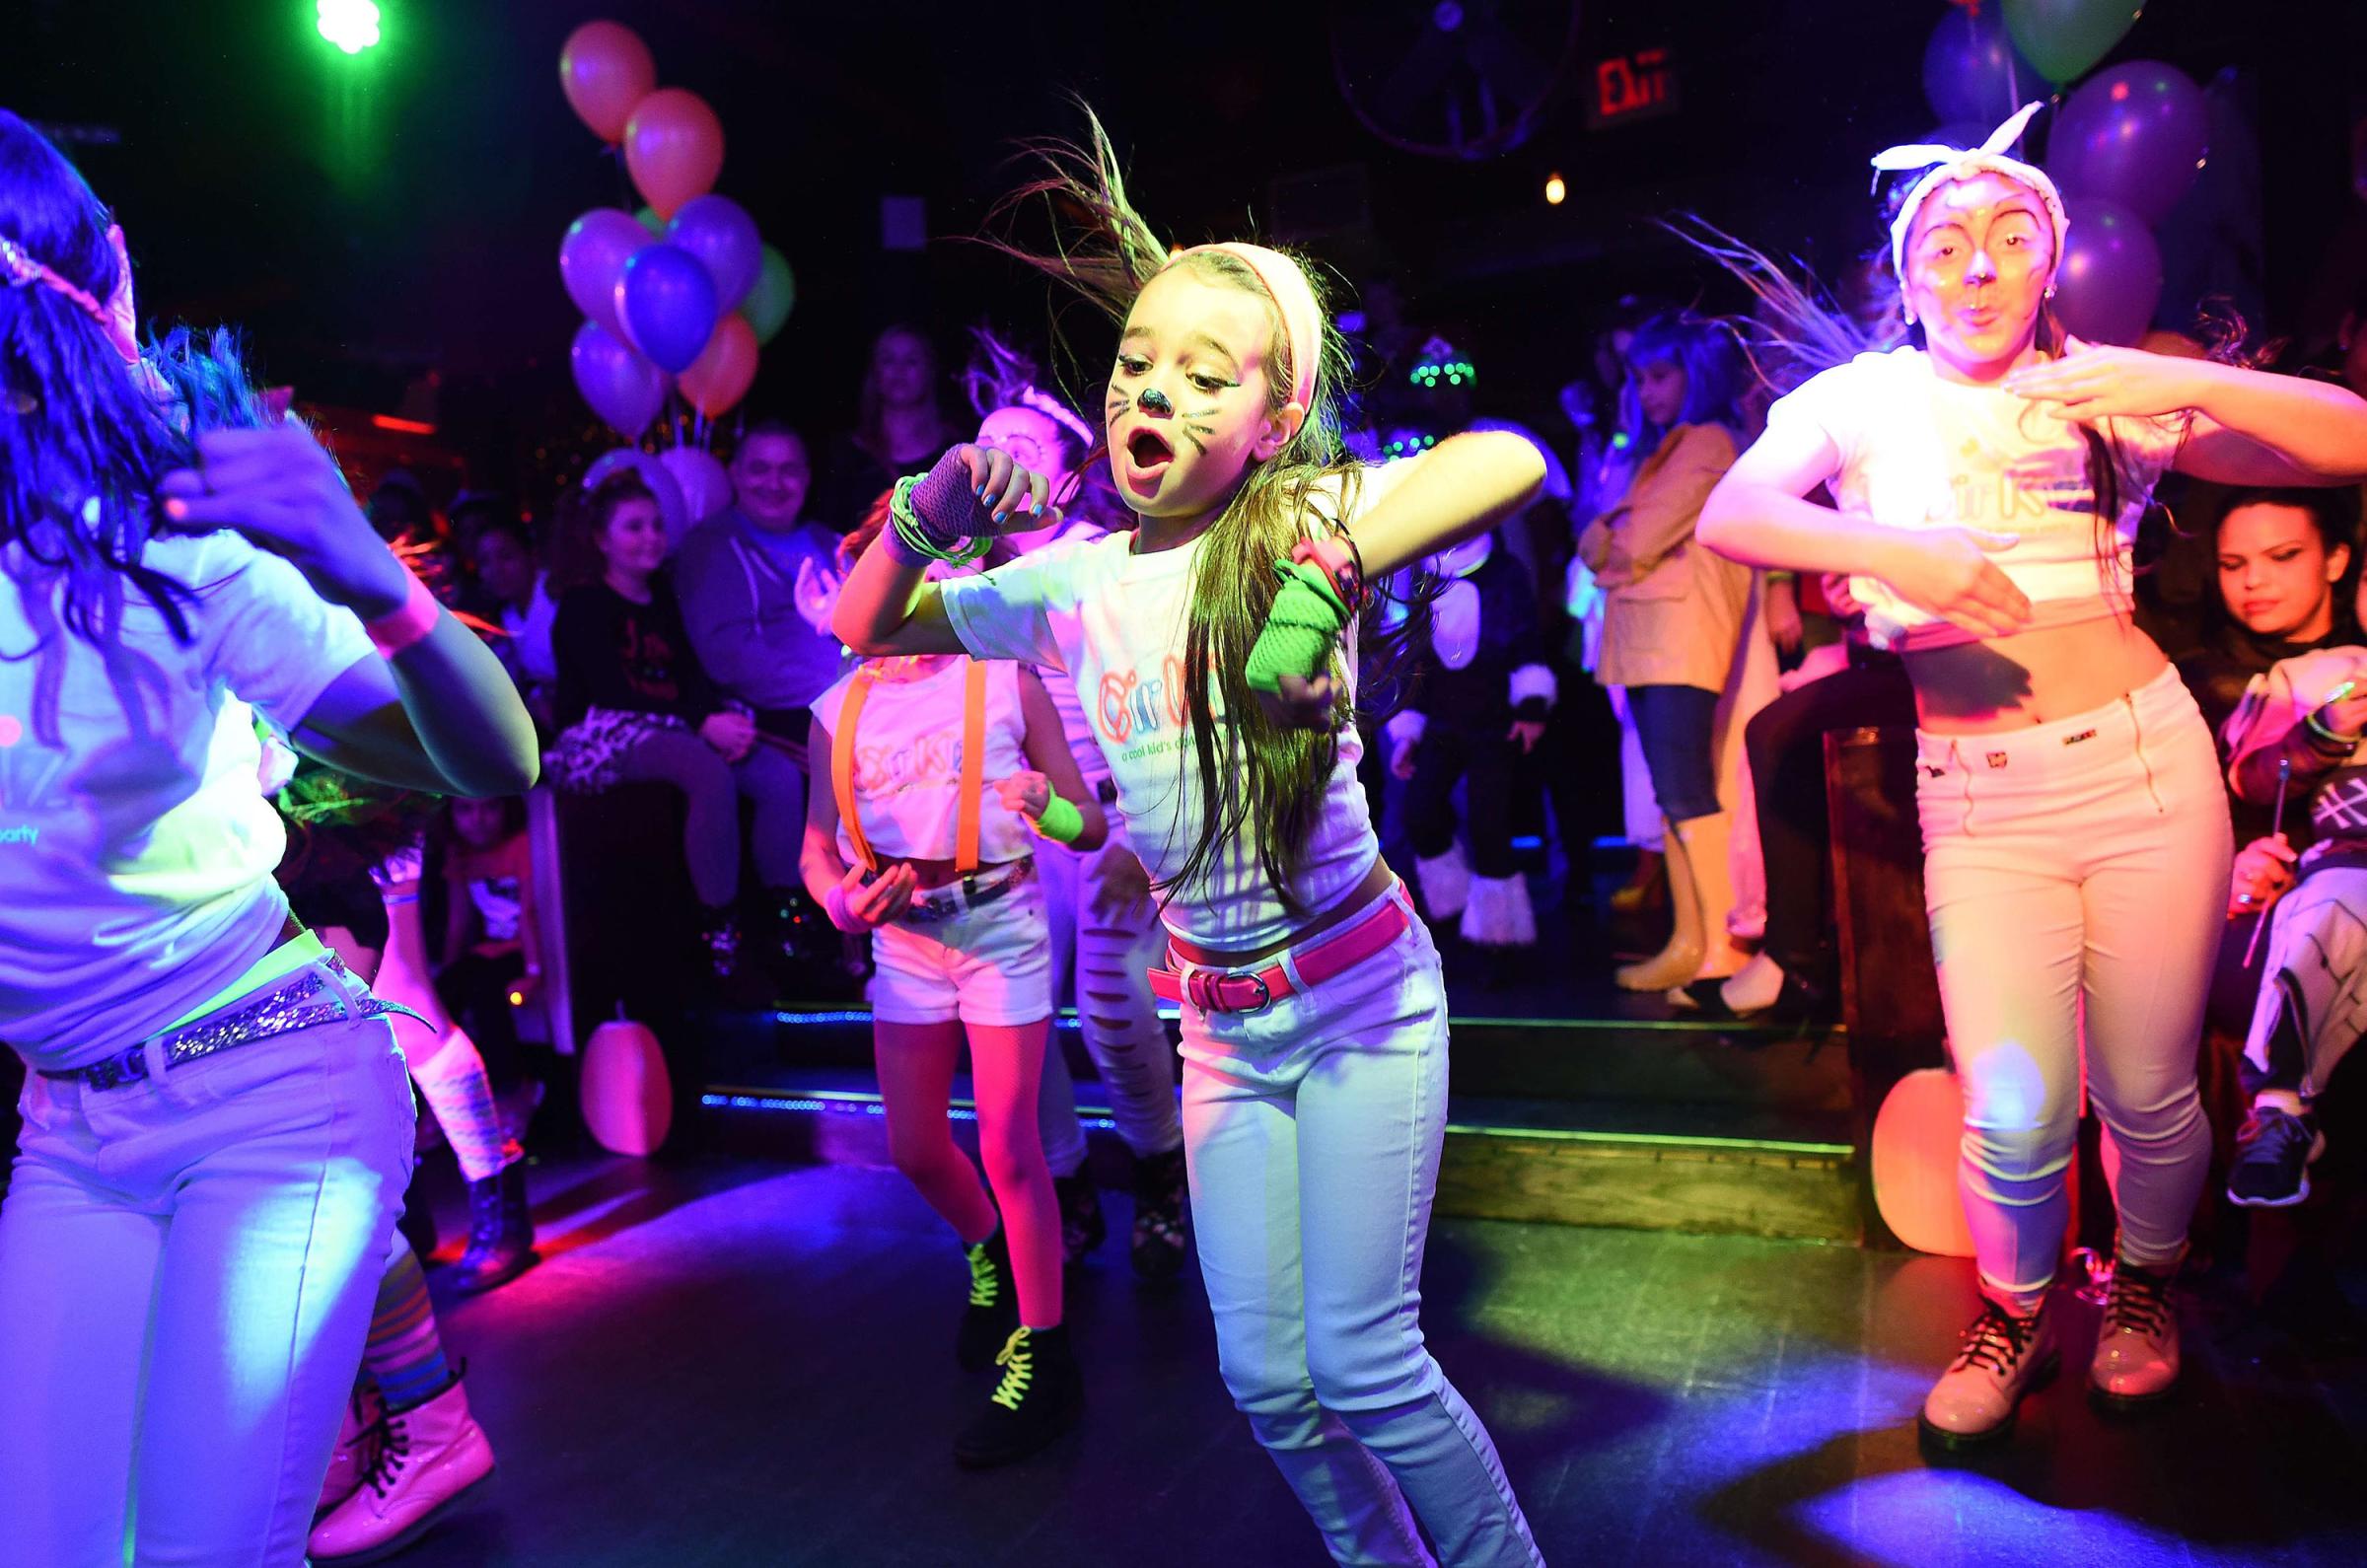 Kids wearing Halloween costumes dance during an electronic dance music party organized by CirKiz at a night club in New York on Oct. 26, 2014.